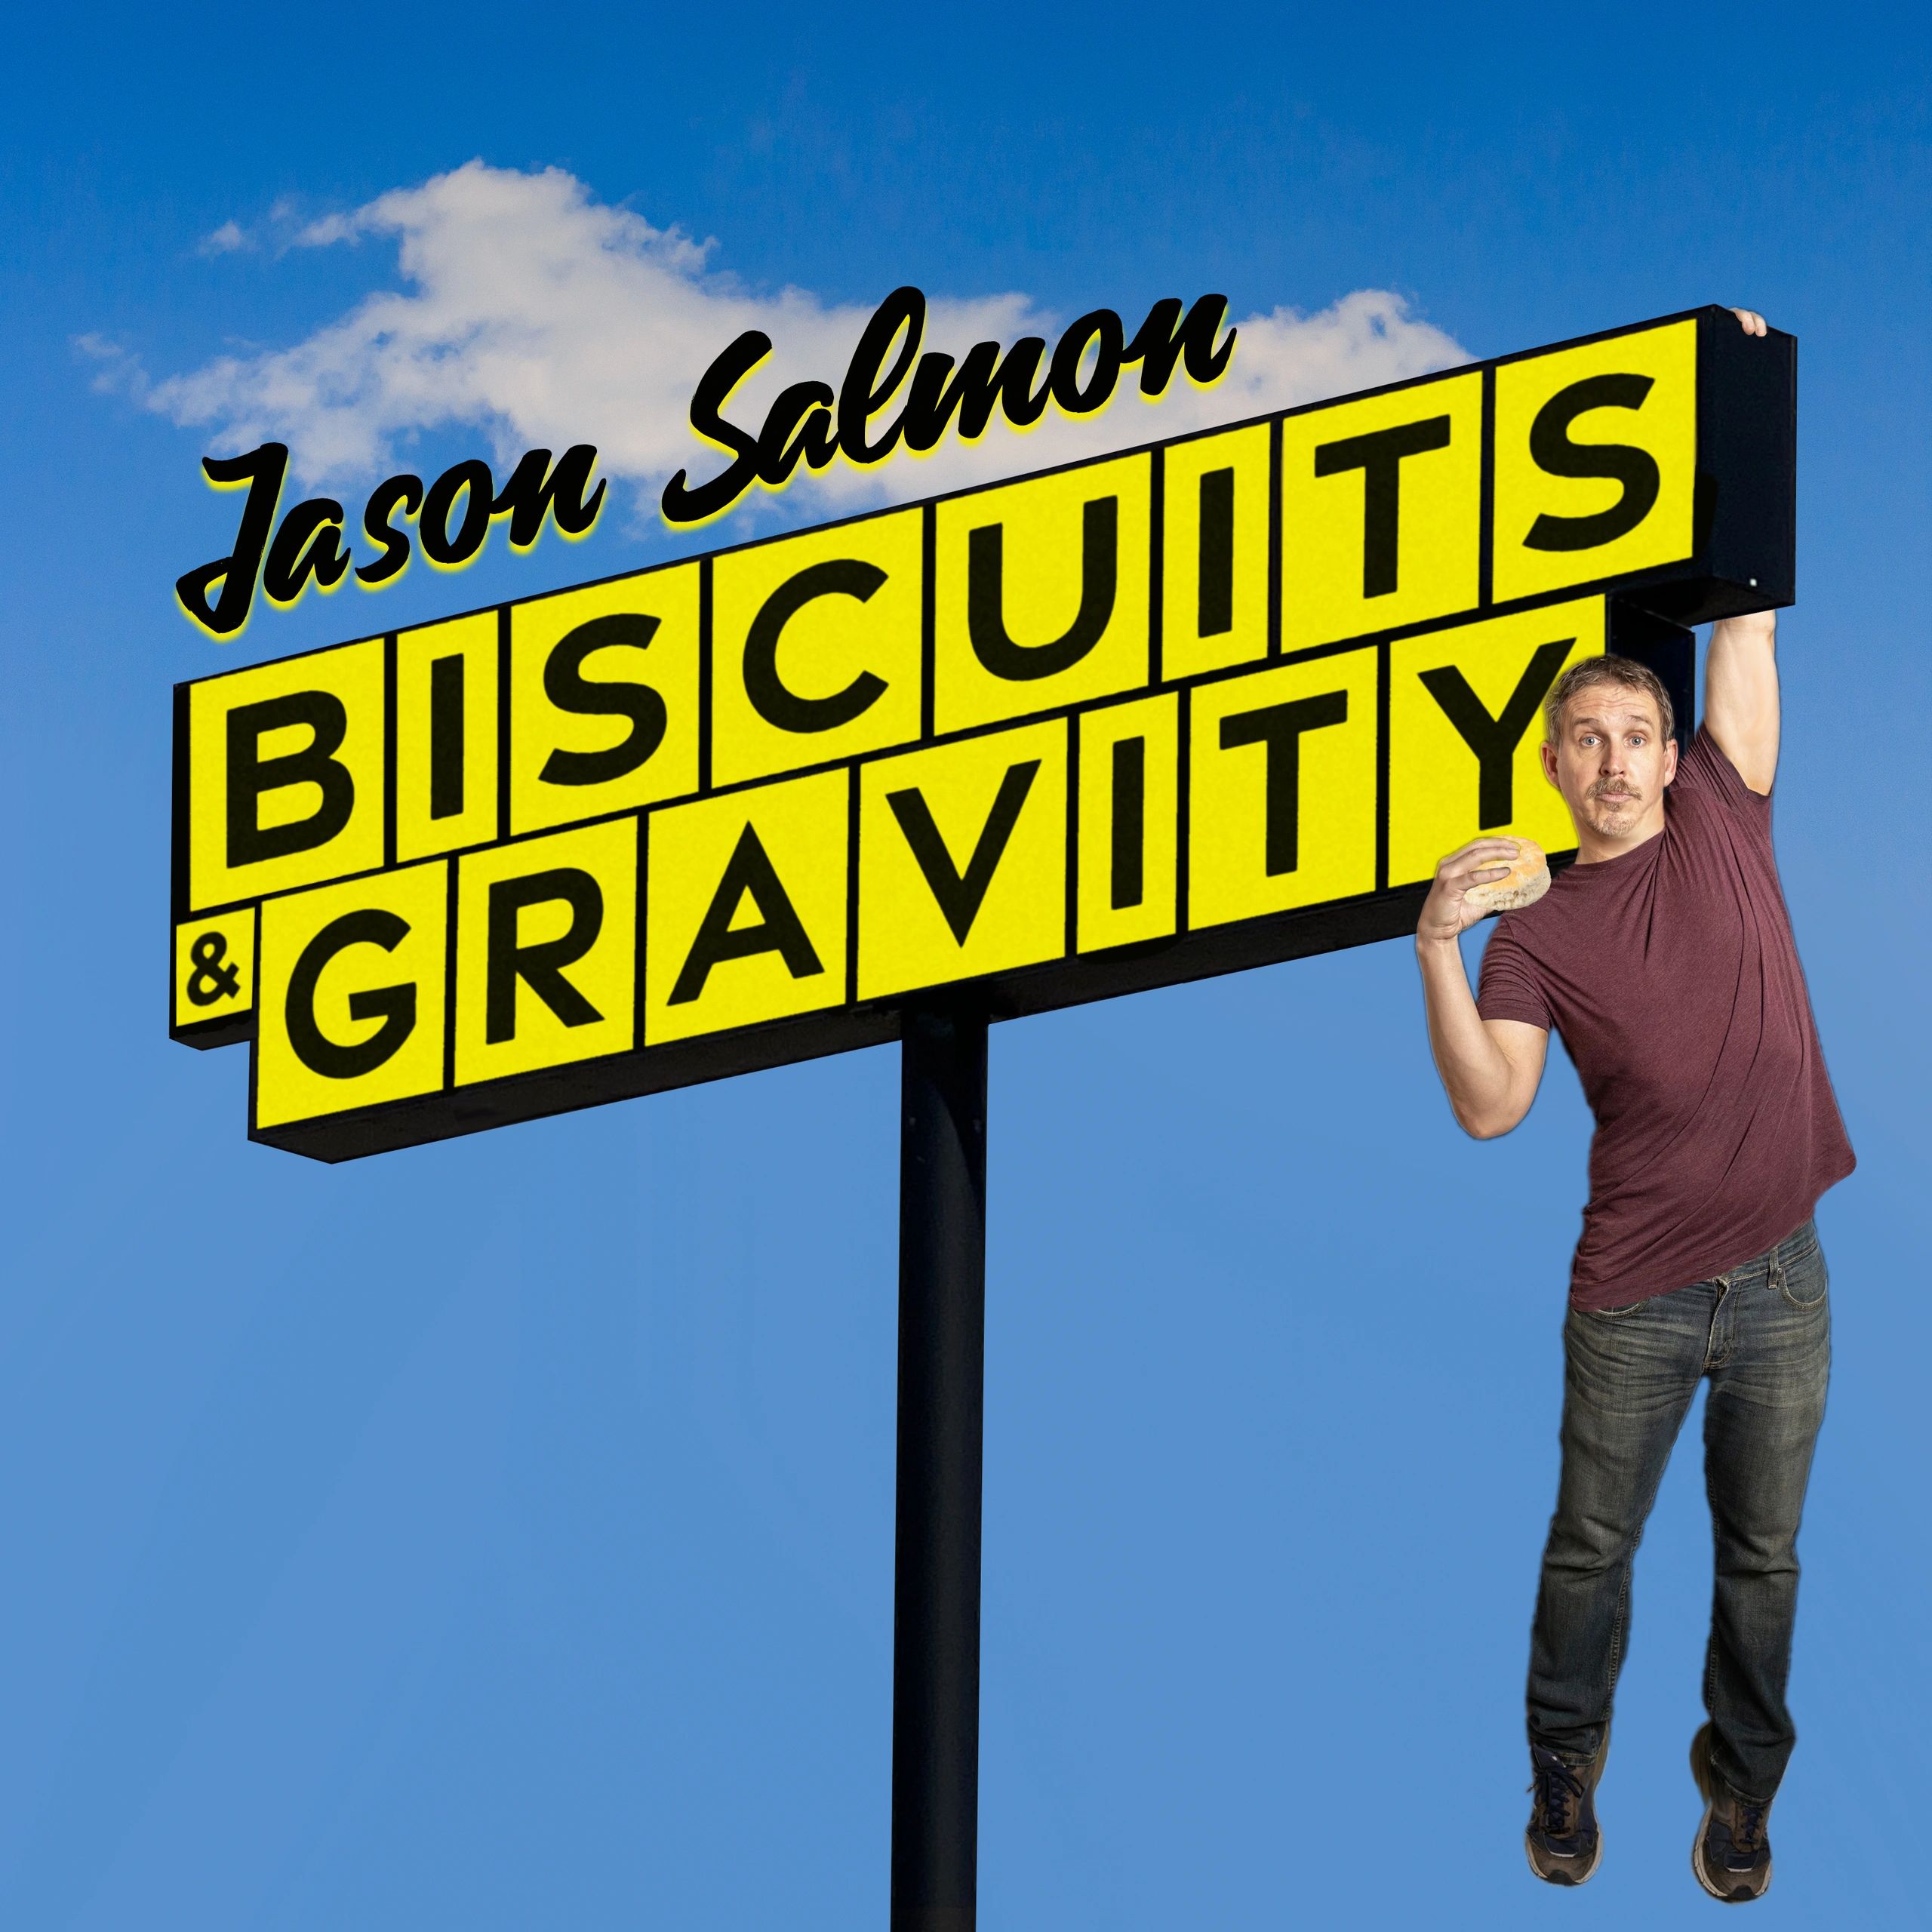 New Standup Special BISCUITS and GRAVITY now streaming on YouTube